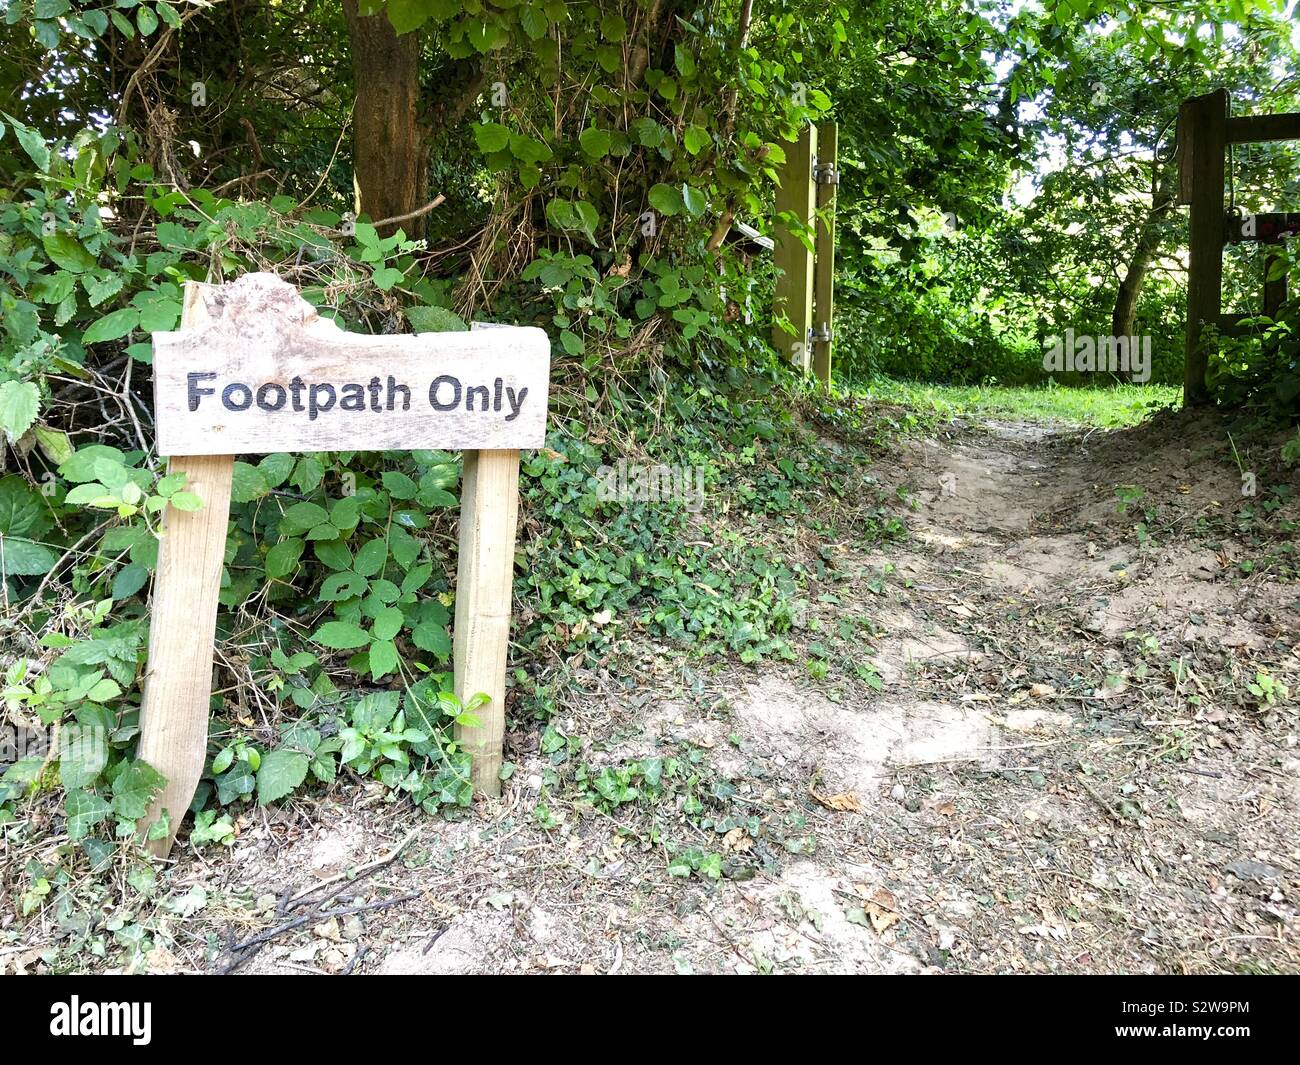 Footpath only sign Stock Photo